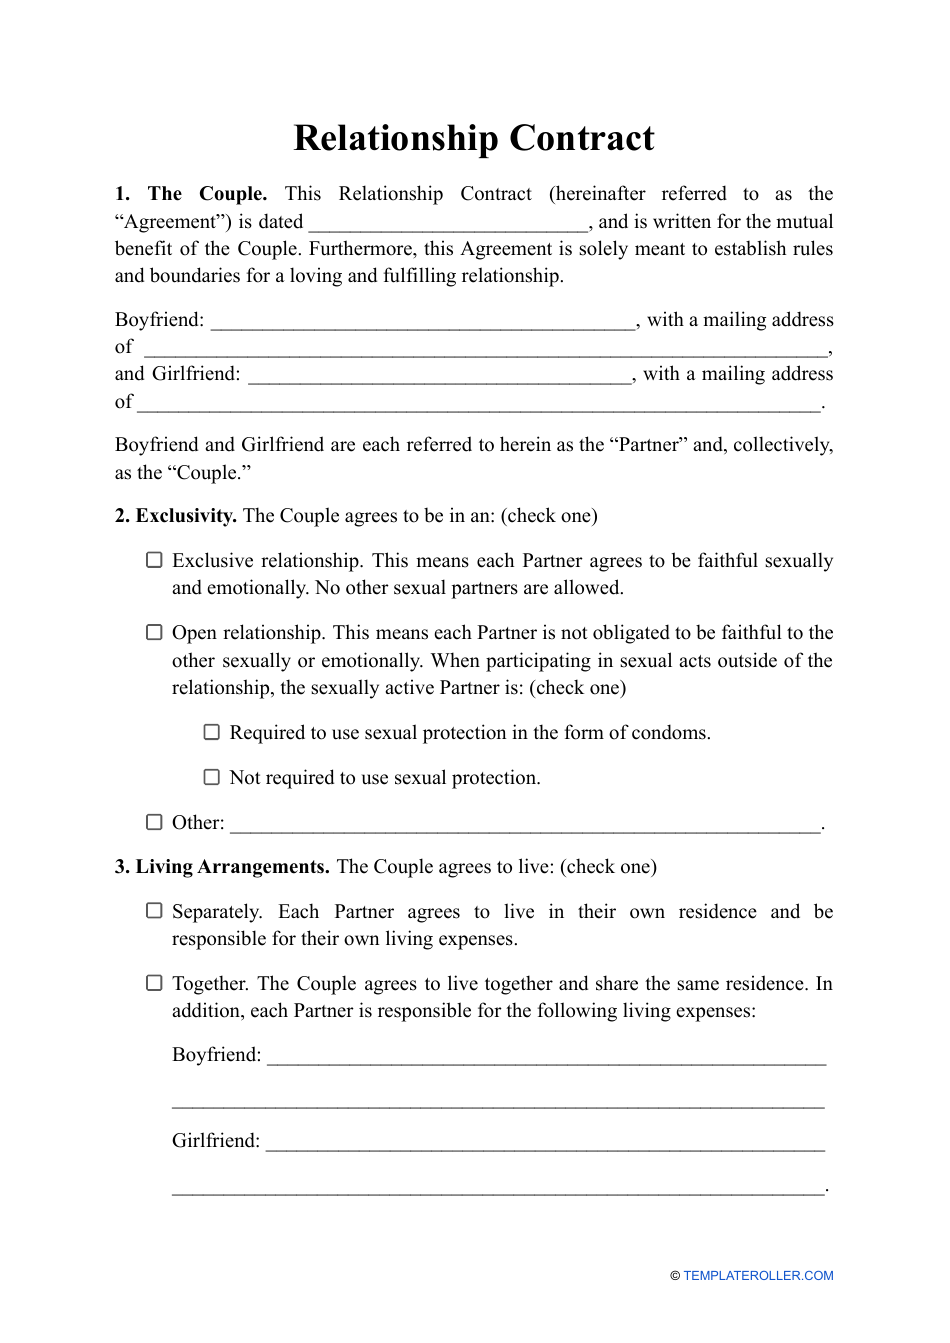 Relationship Contract Template Fill Out, Sign Online and Download PDF